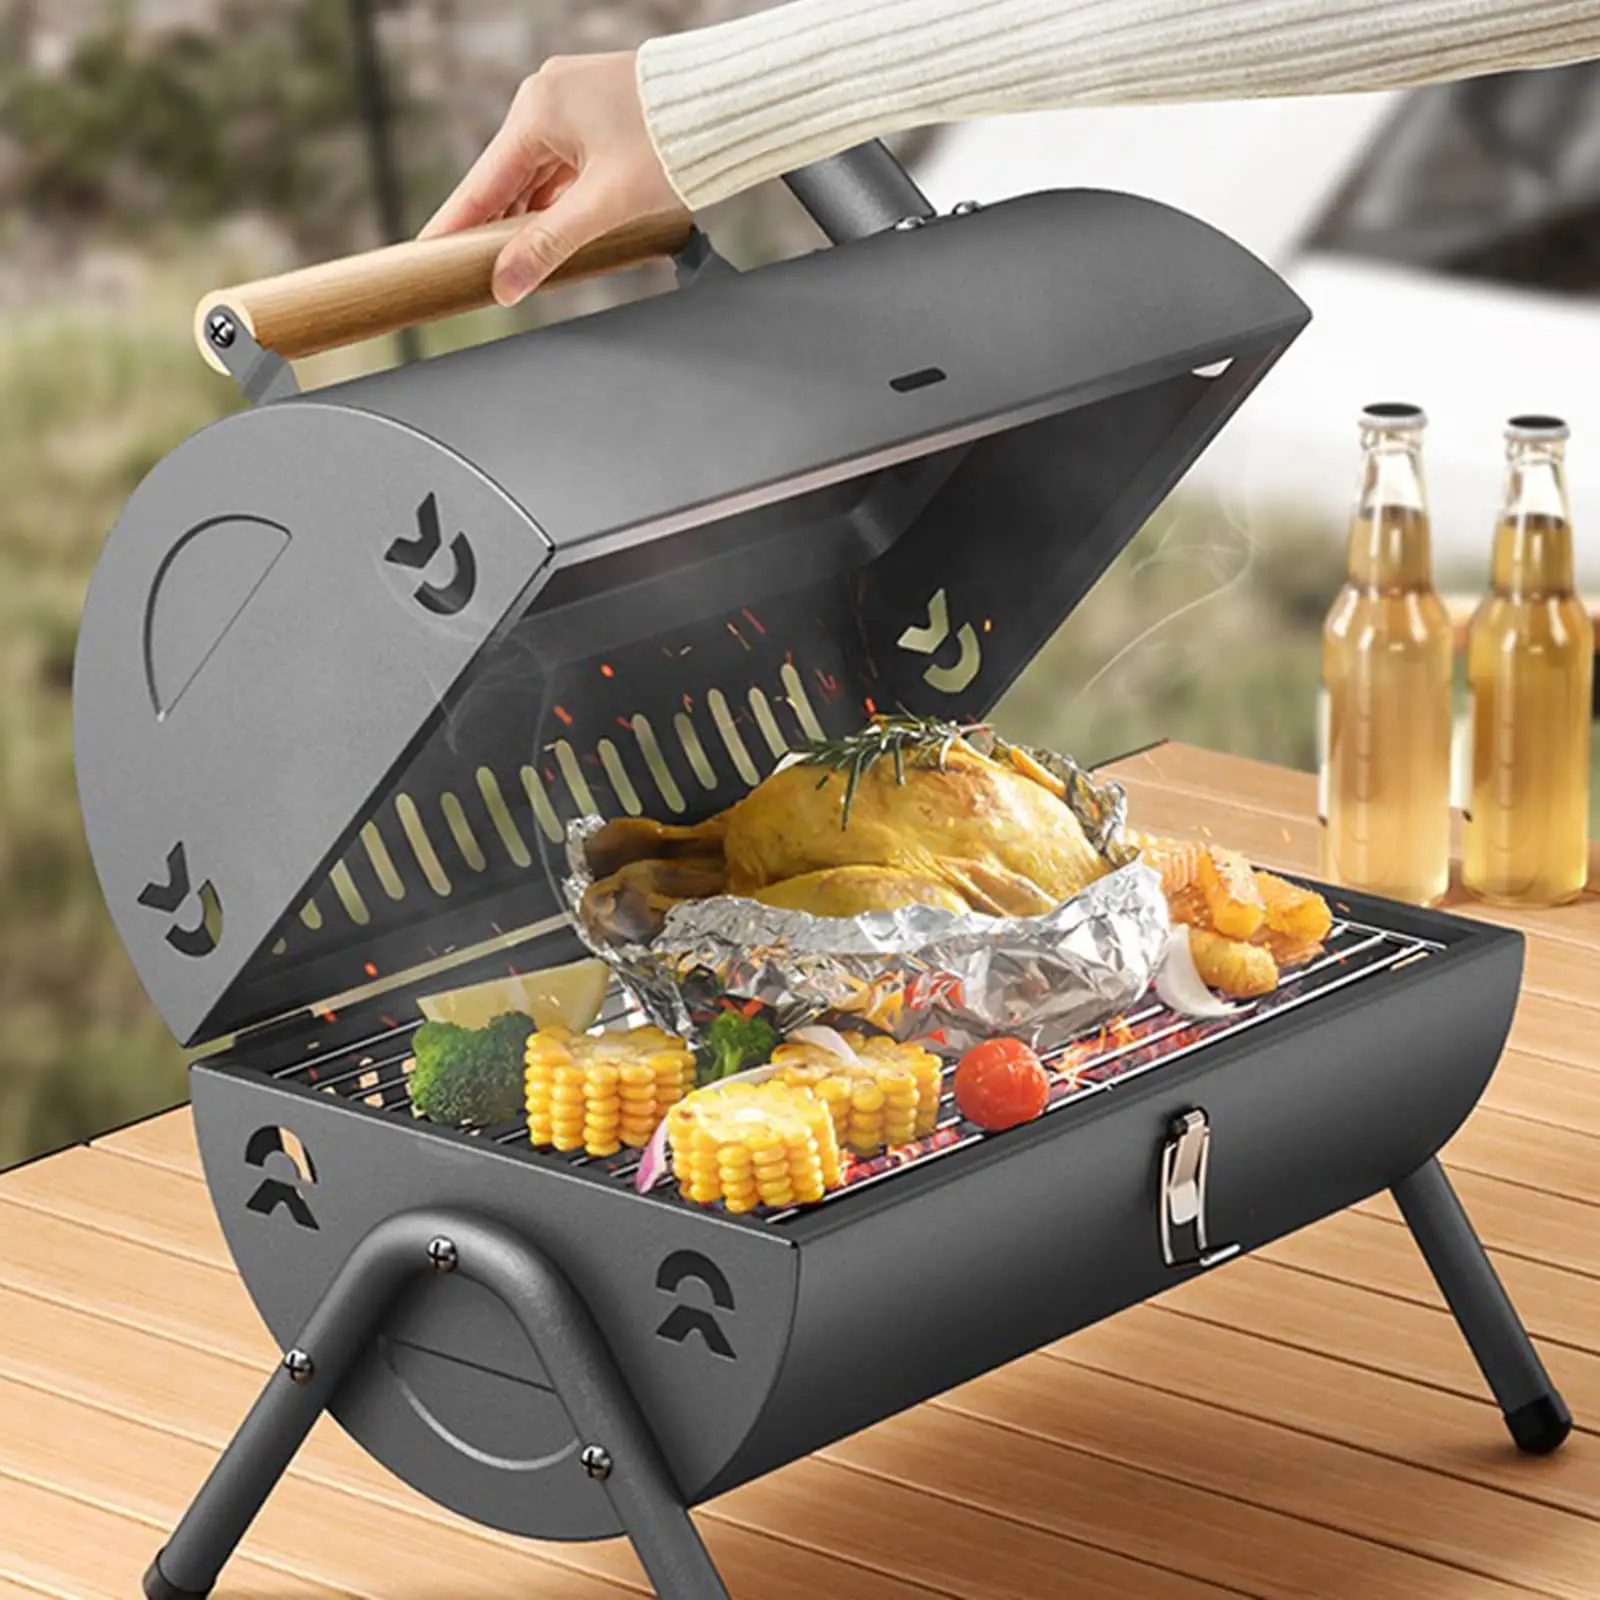 Alocs Portable Camping Charcoal BBQ Grills Garden Picnic Wood Stove Foldable Outdoor Smokeless Barbeque Grill